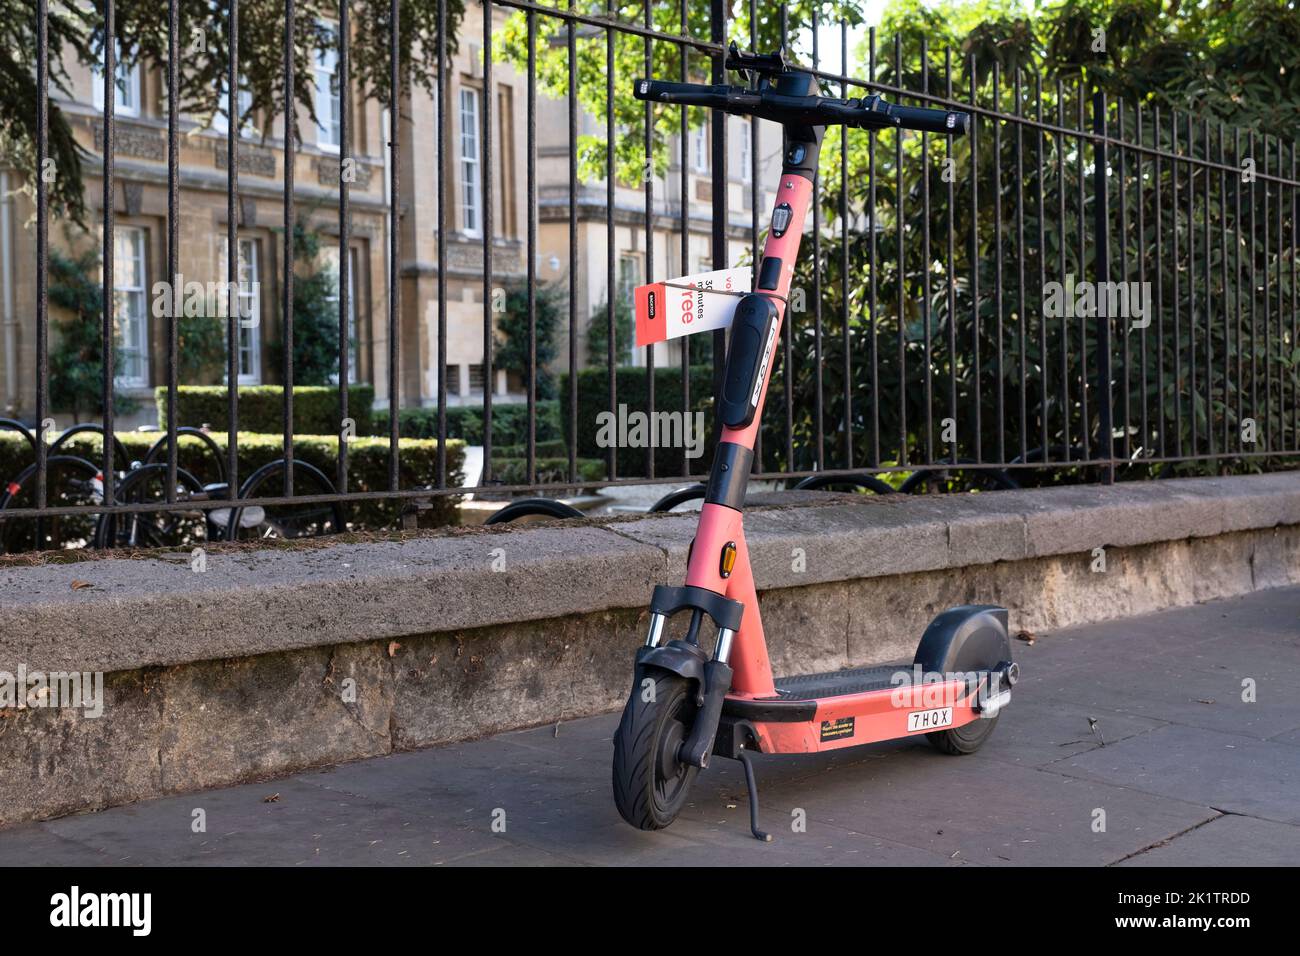 Shared E-scooters or e-steps of the company VOI for rent in a street in Oxford, England. E-mobility Stock Photo